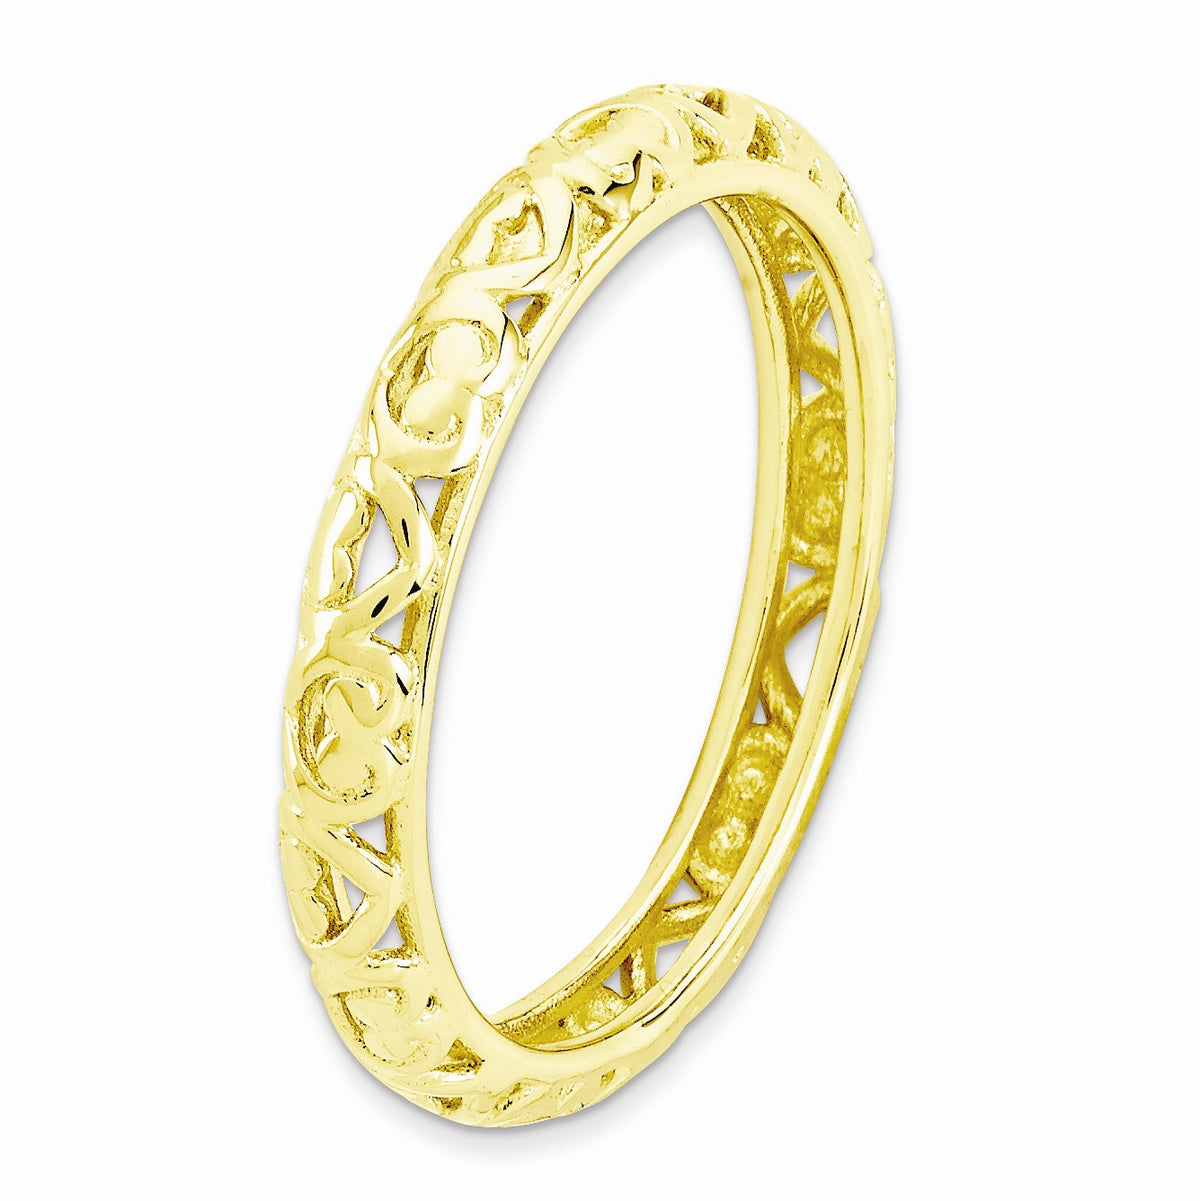 Alternate view of the 3.5mm Gold Tone Sterling Silver Stackable Domed Carved Heart Band by The Black Bow Jewelry Co.